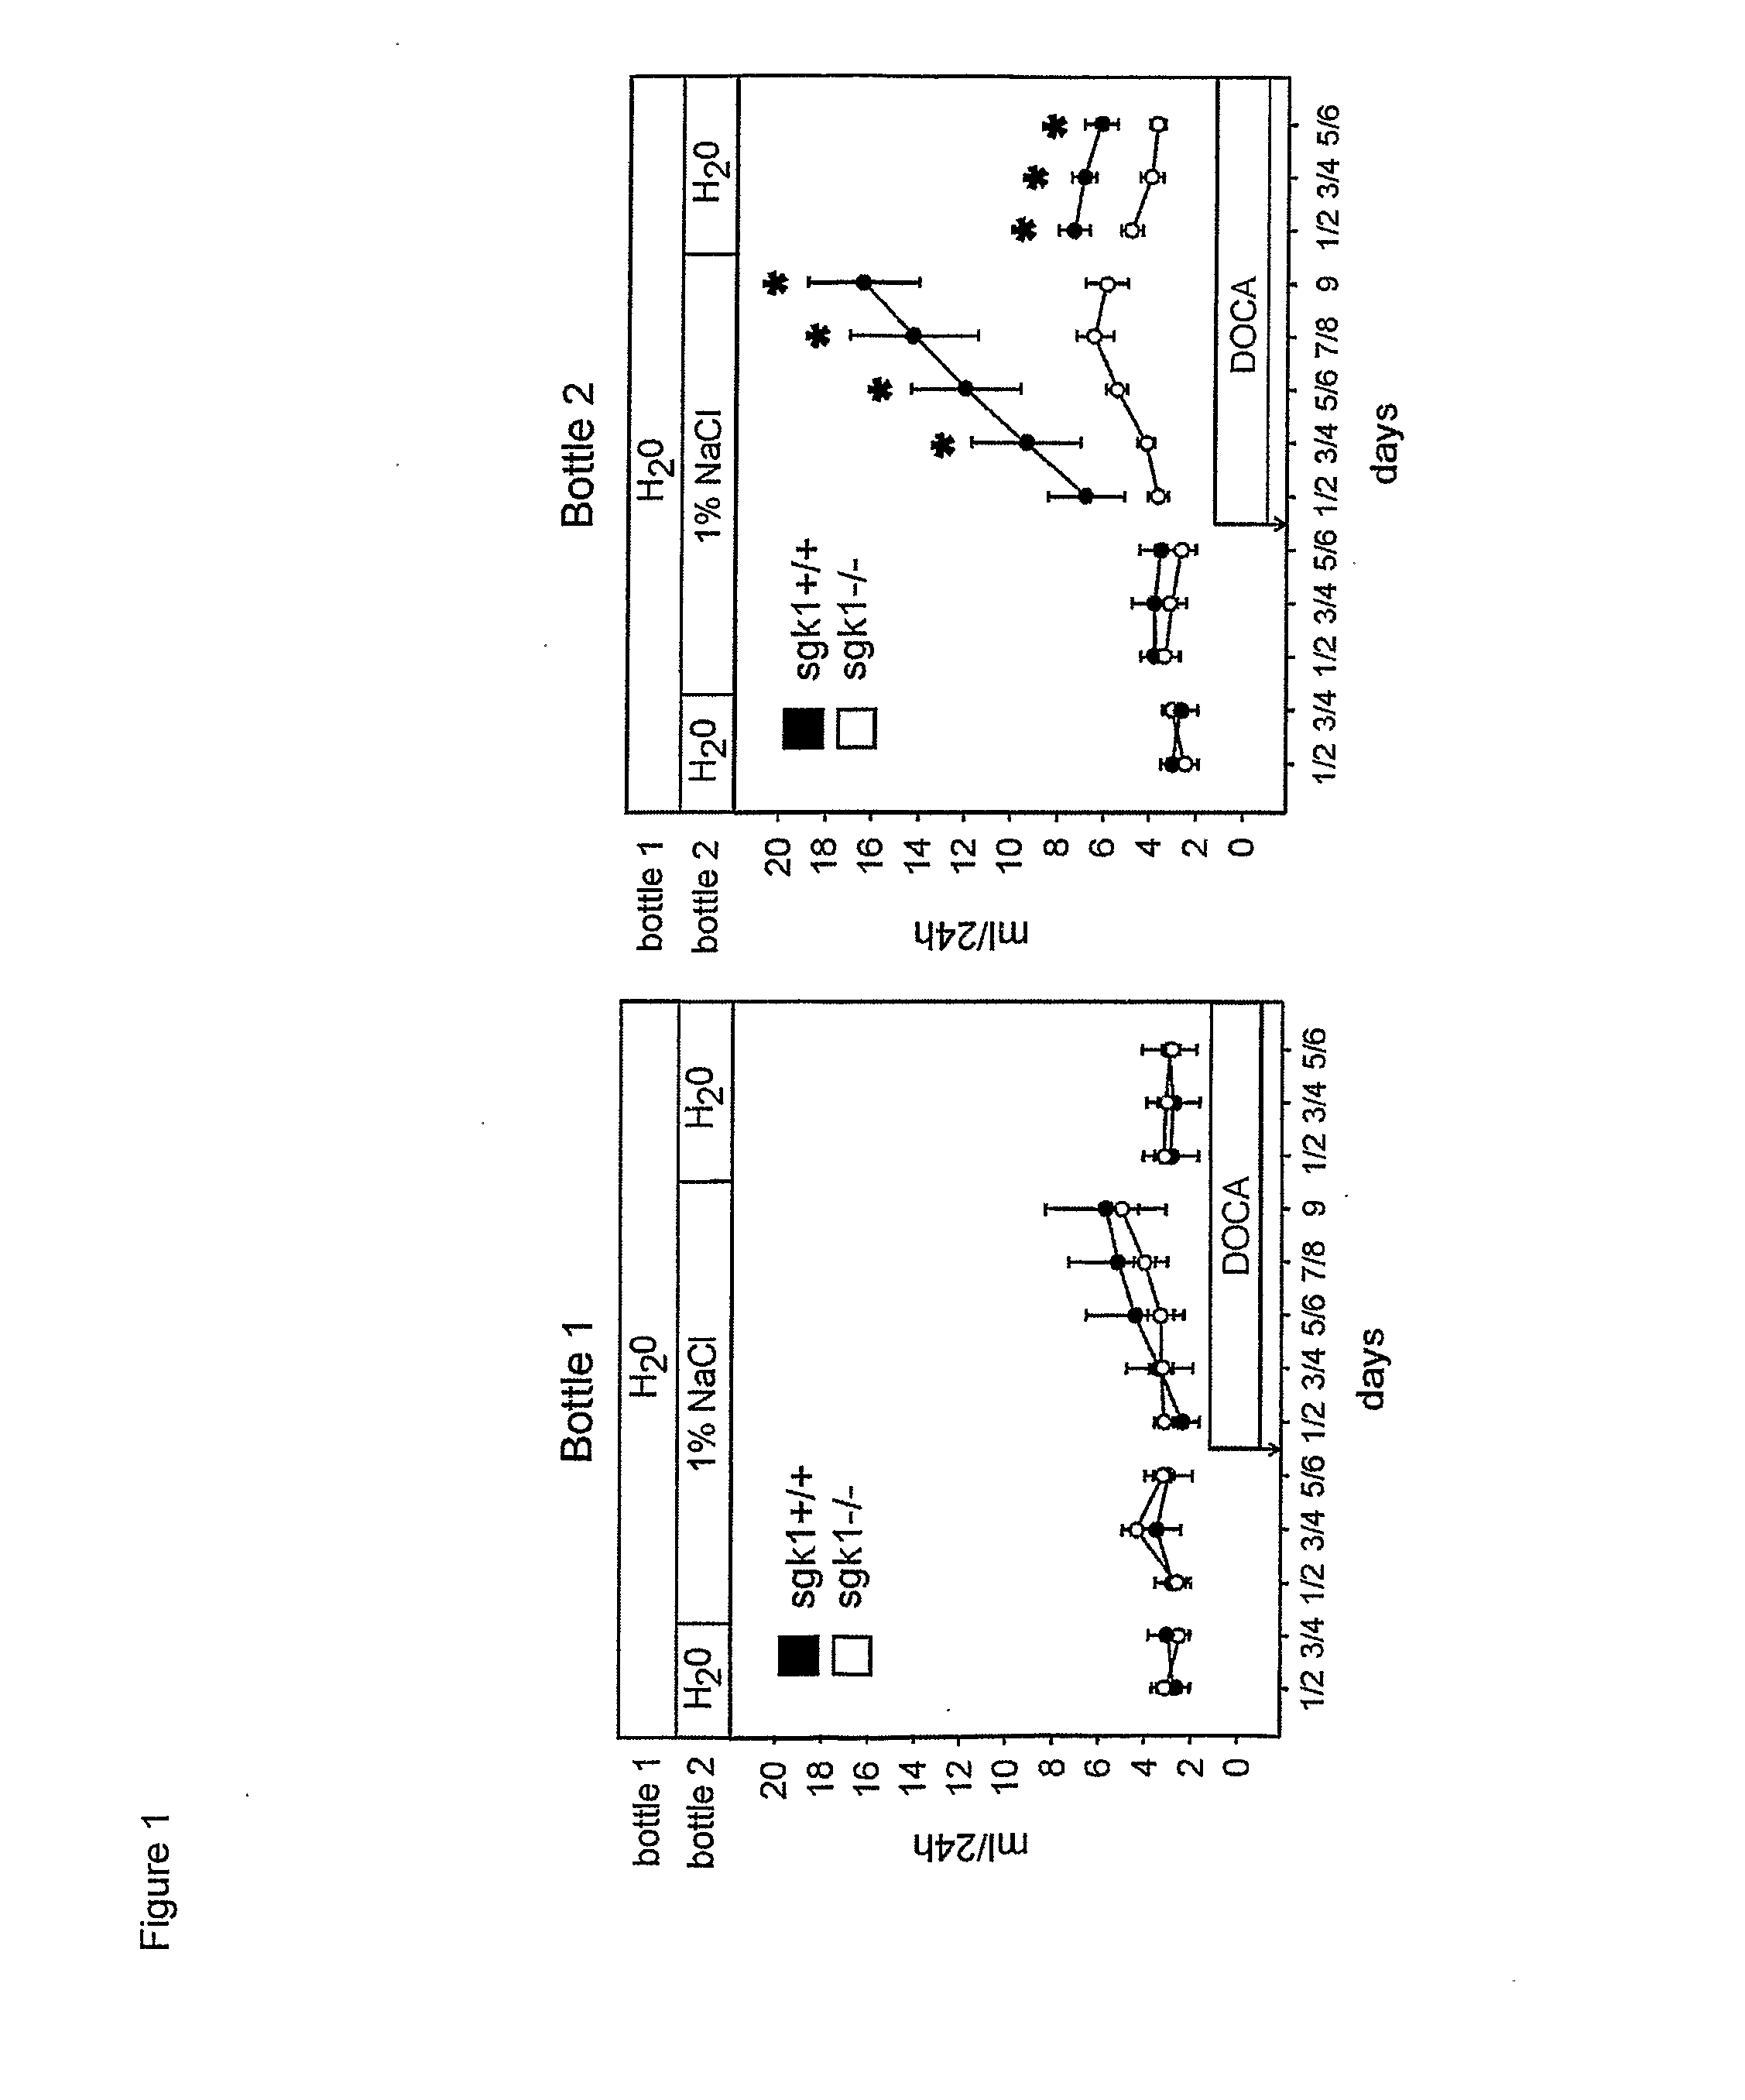 Methods For Interfering With Fibrosis